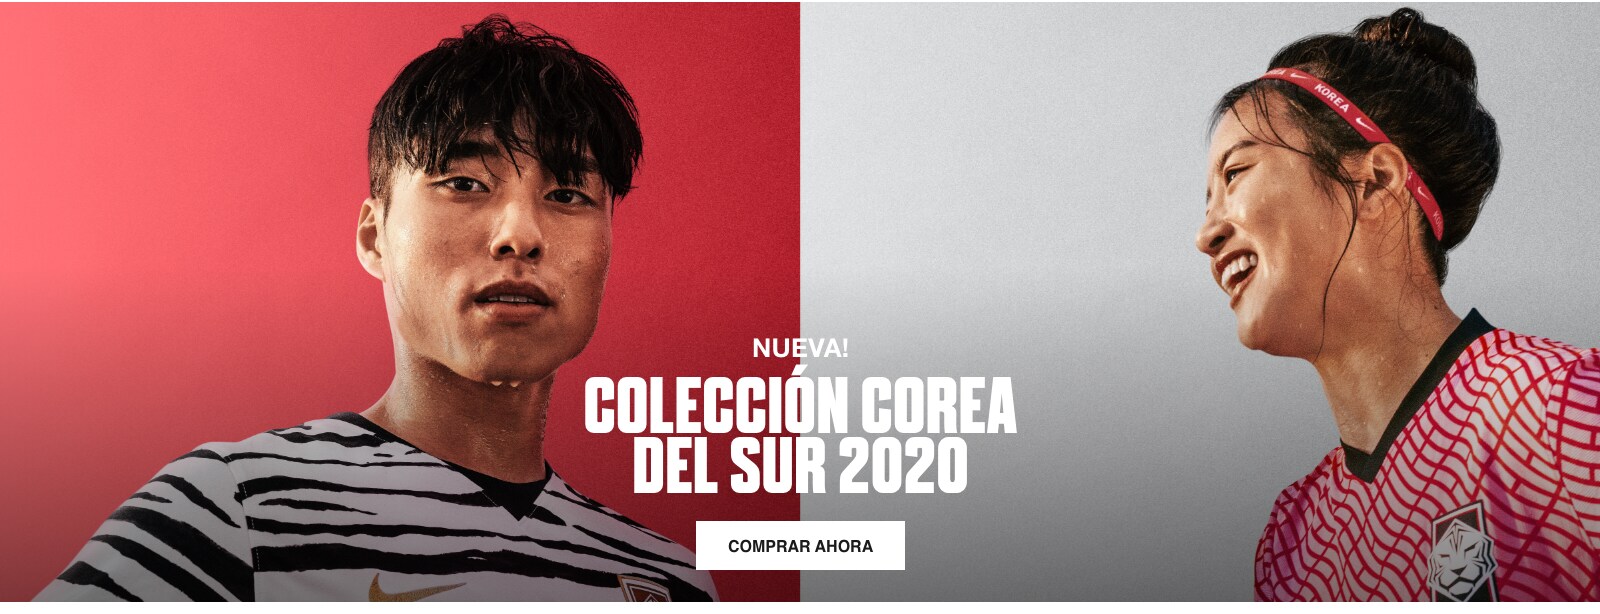 Just landed. Shop the new South Korea Collection.